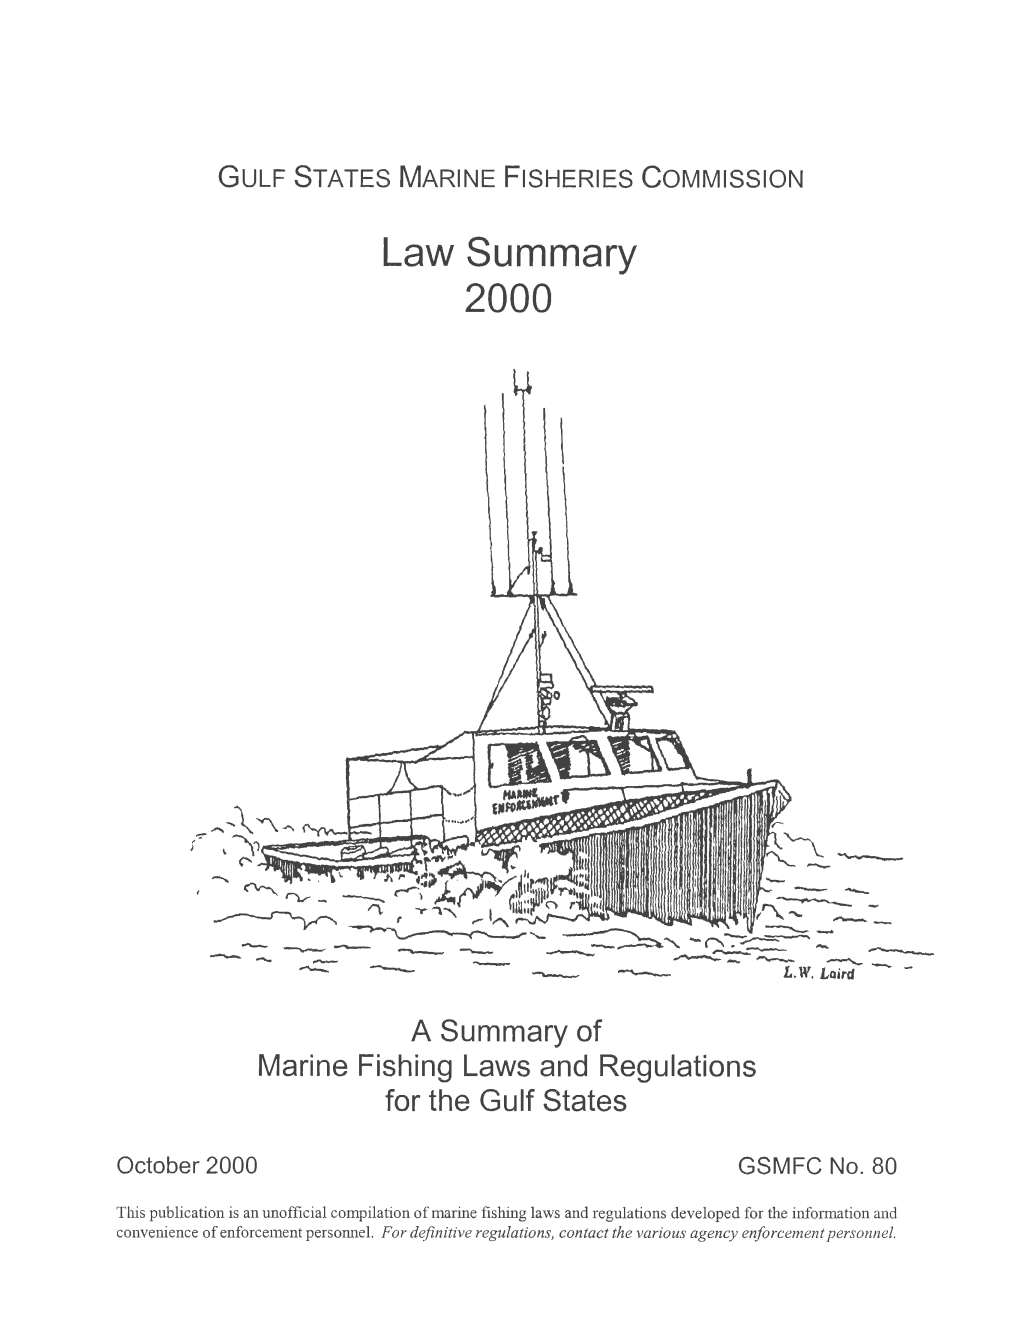 A Summary of Marine Fishing Laws and Regulations 2000